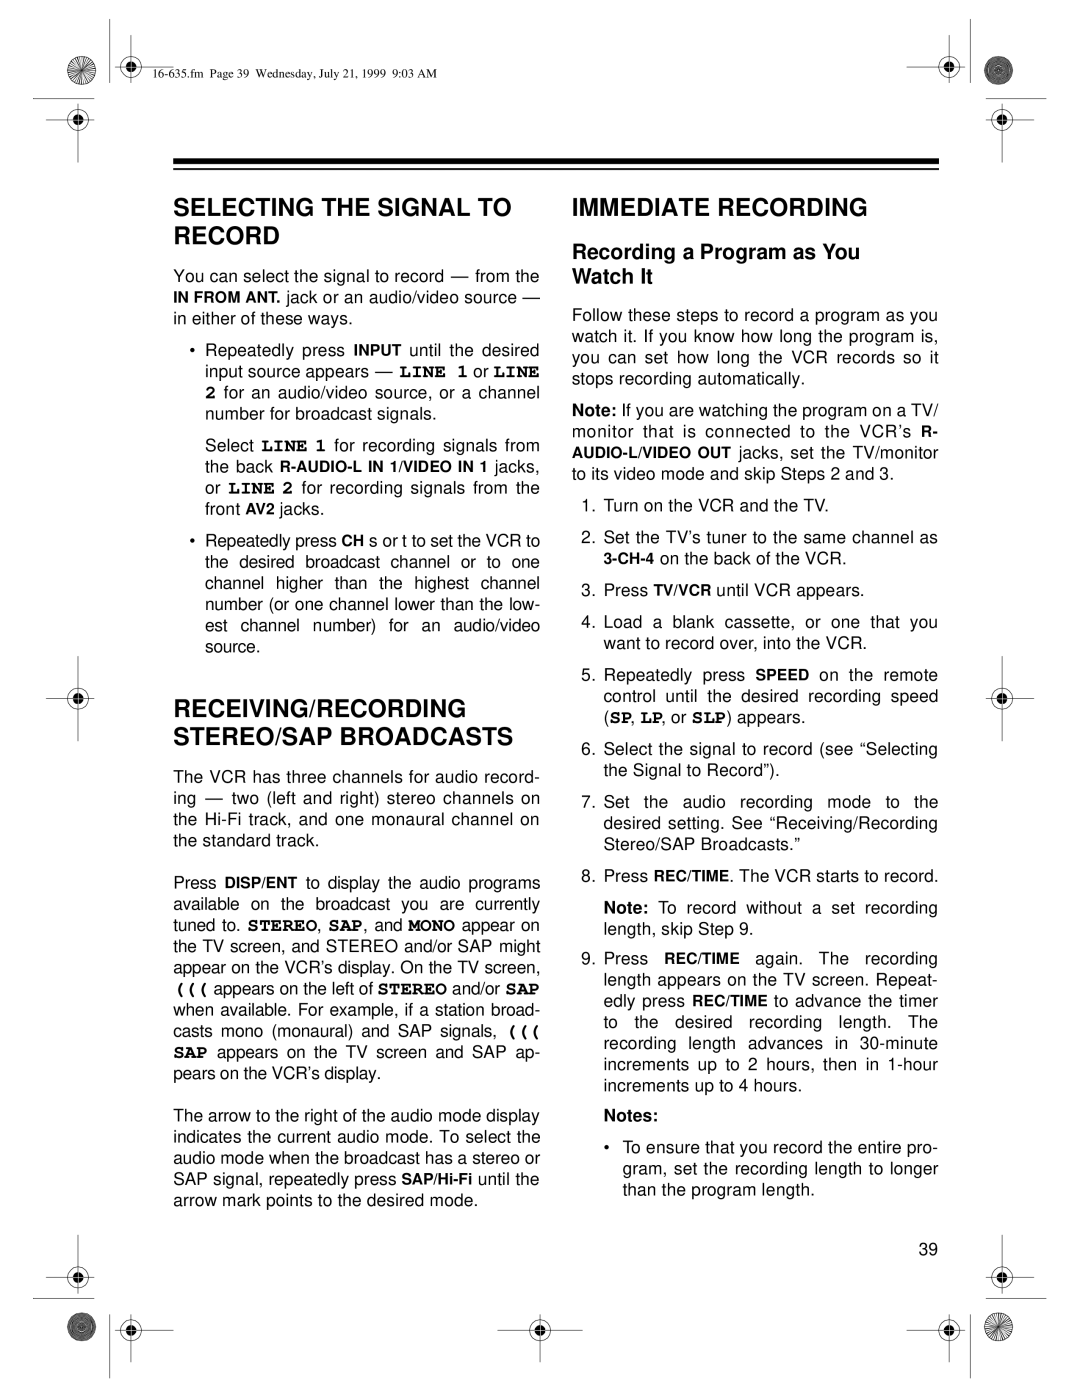 Radio Shack 66 owner manual Selecting The Signal To Record, Immediate Recording, Receiving/Recording Stereo/Sap Broadcasts 